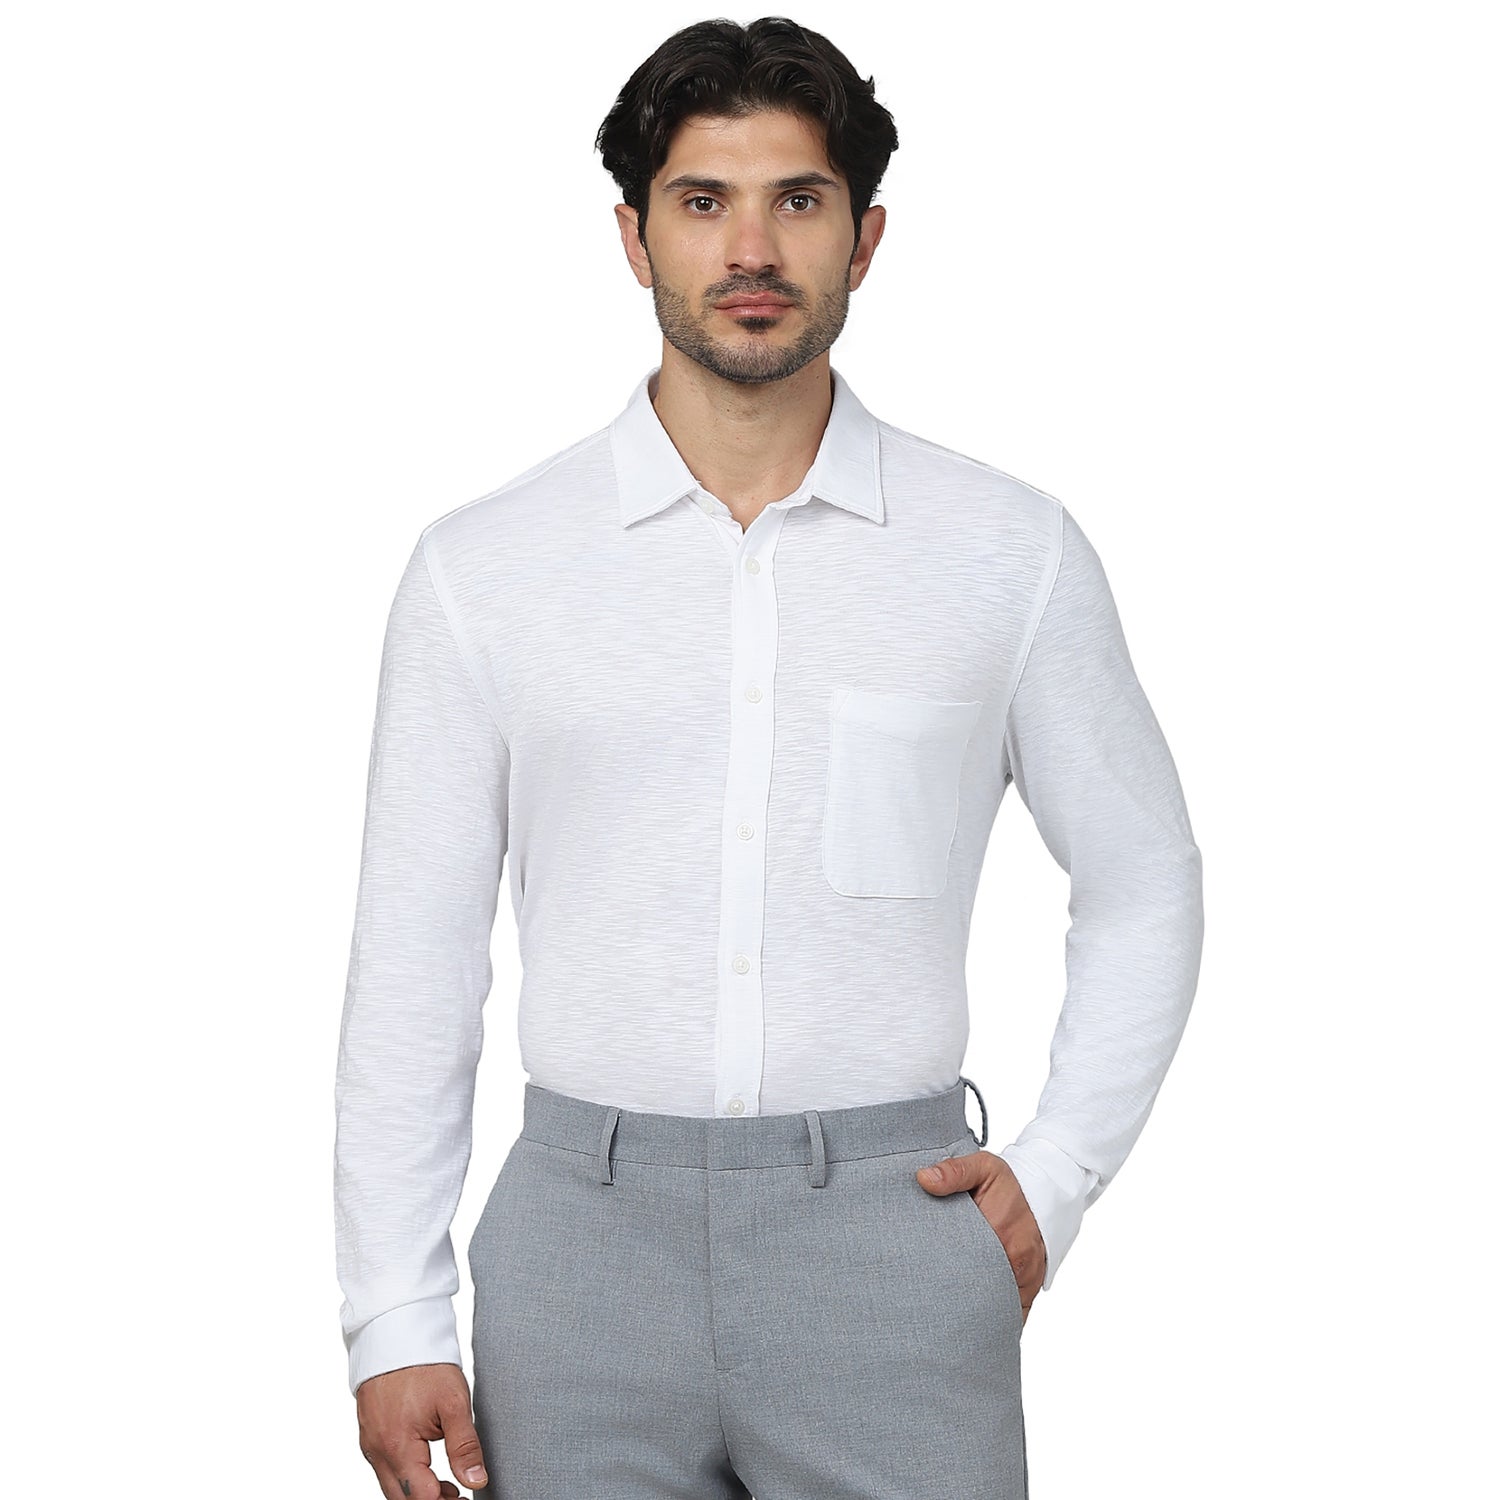 Men's White Button-Down Collar Solid Regular Fit Cotton Knit Shirts (GASELLE)